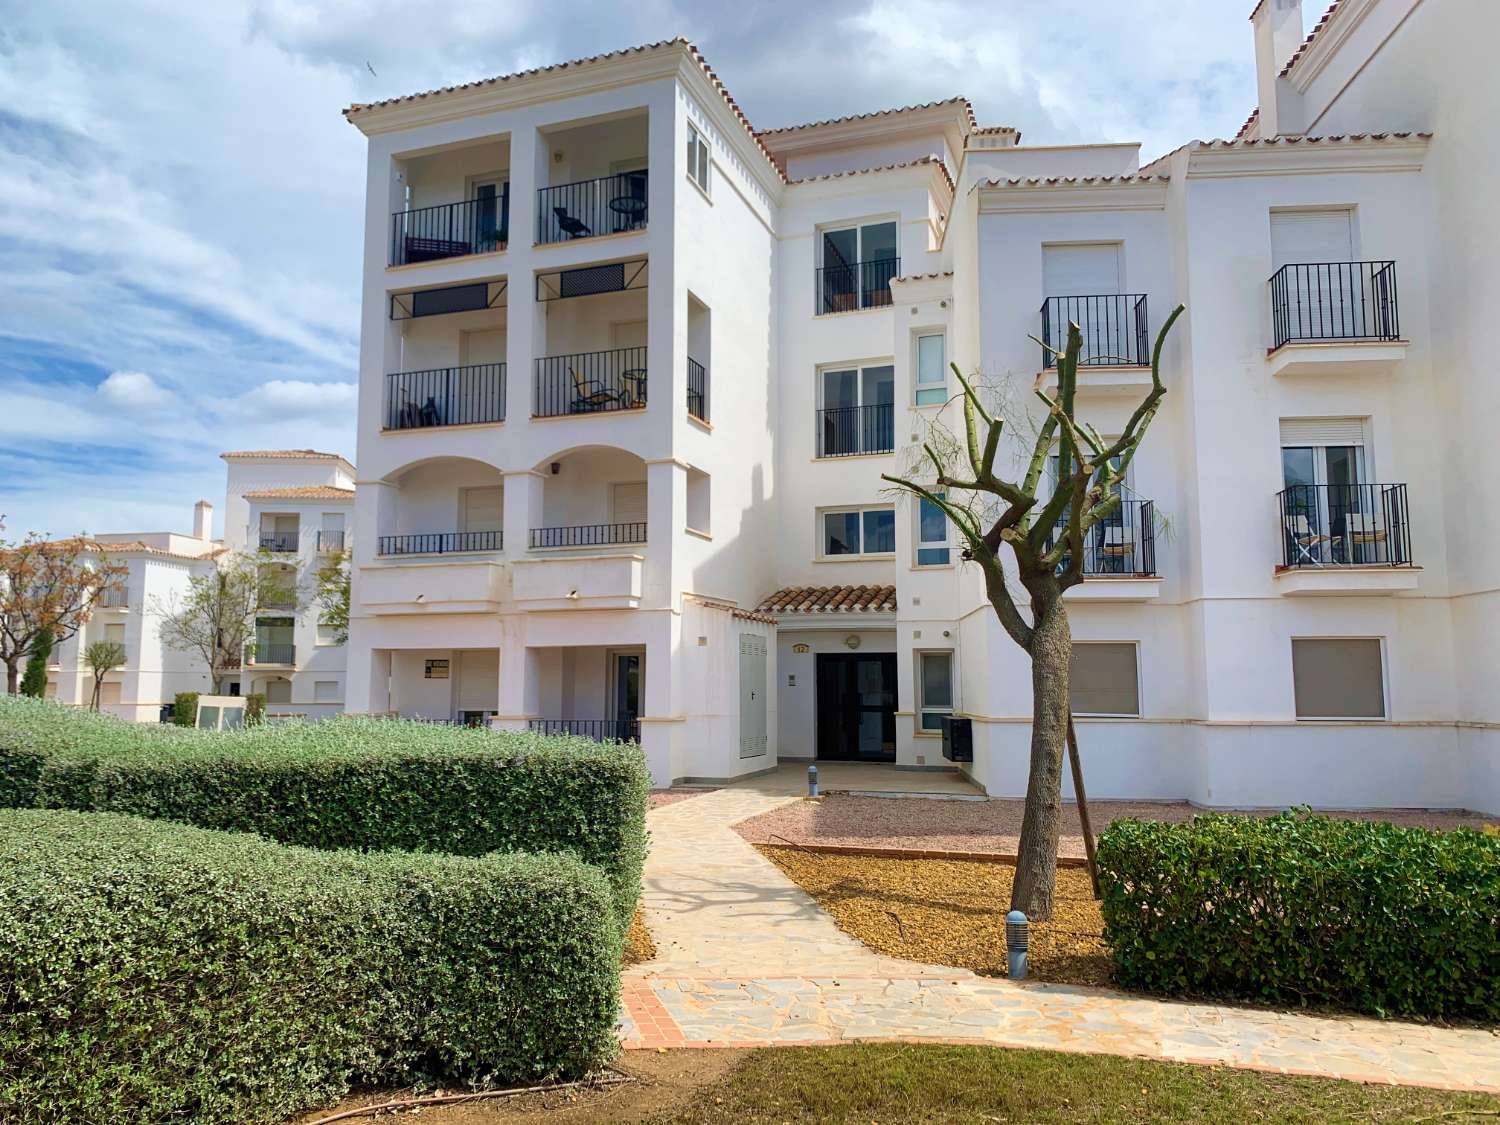 LARGE GROUND FLOOR APARTMENT IN FRONT OF THE POOL AND THE GOLF COURSE